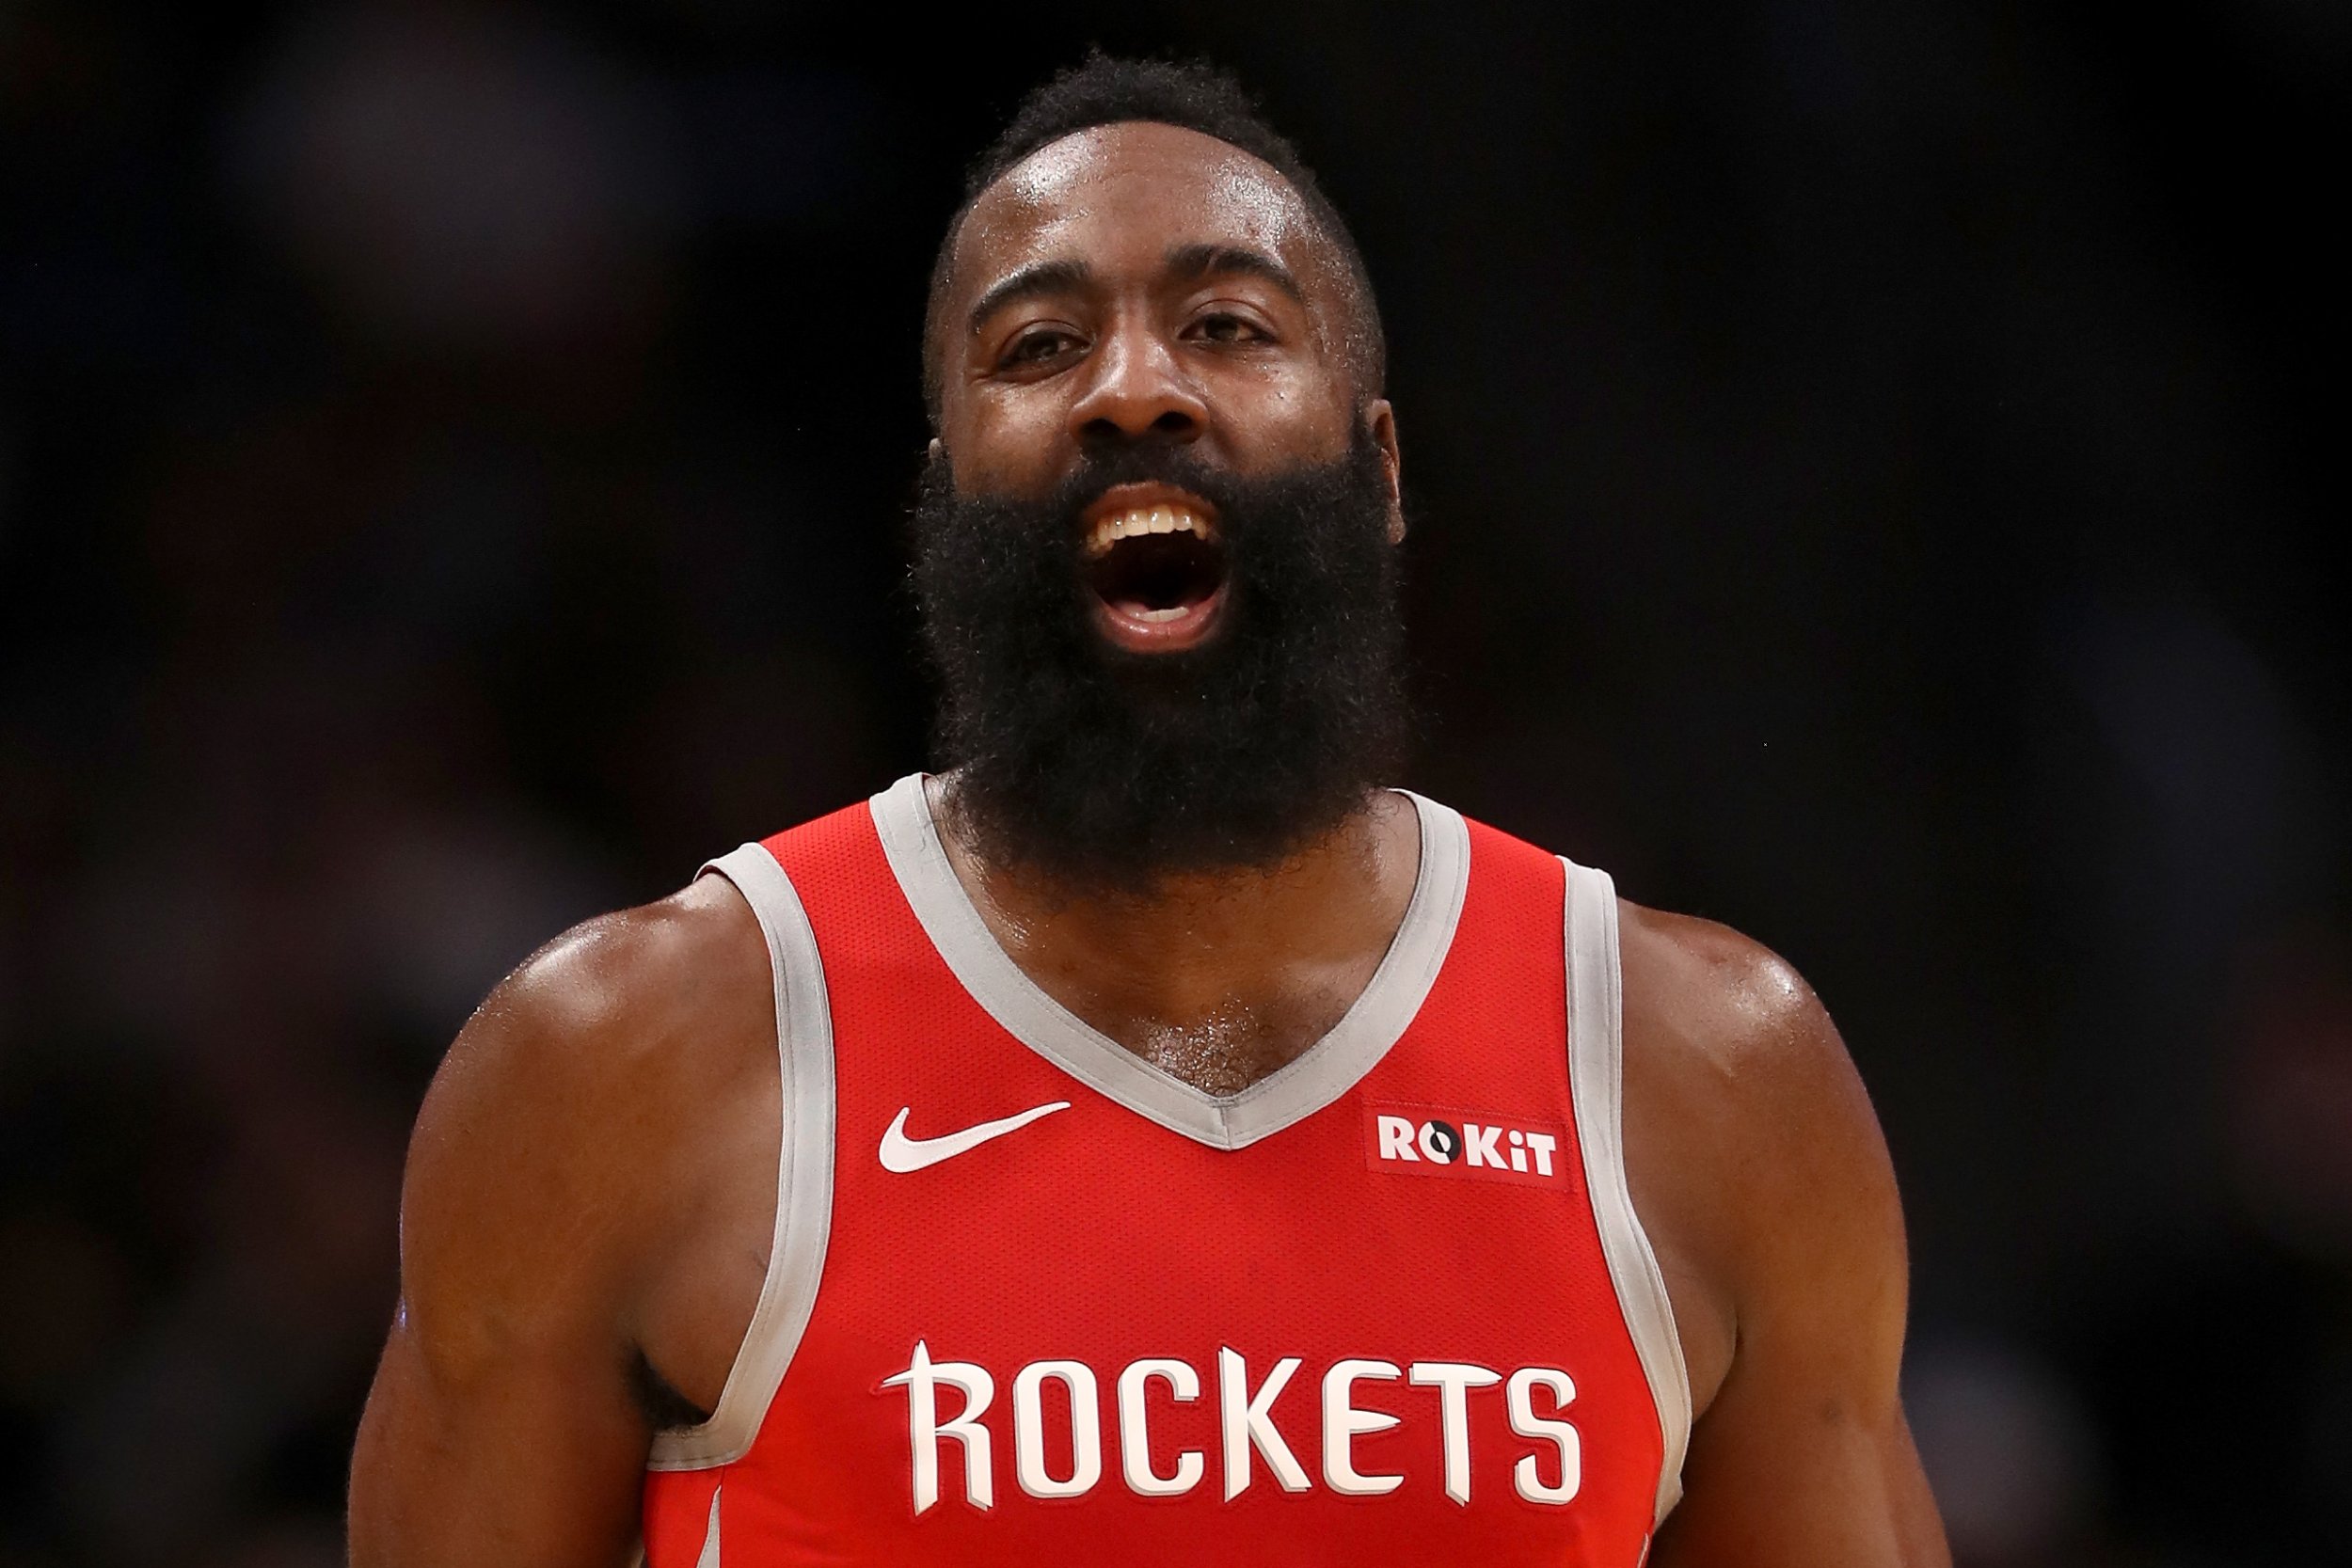 Nba James Harden Russell Westbrook Called Sex Slaves By Ex Nfl Star